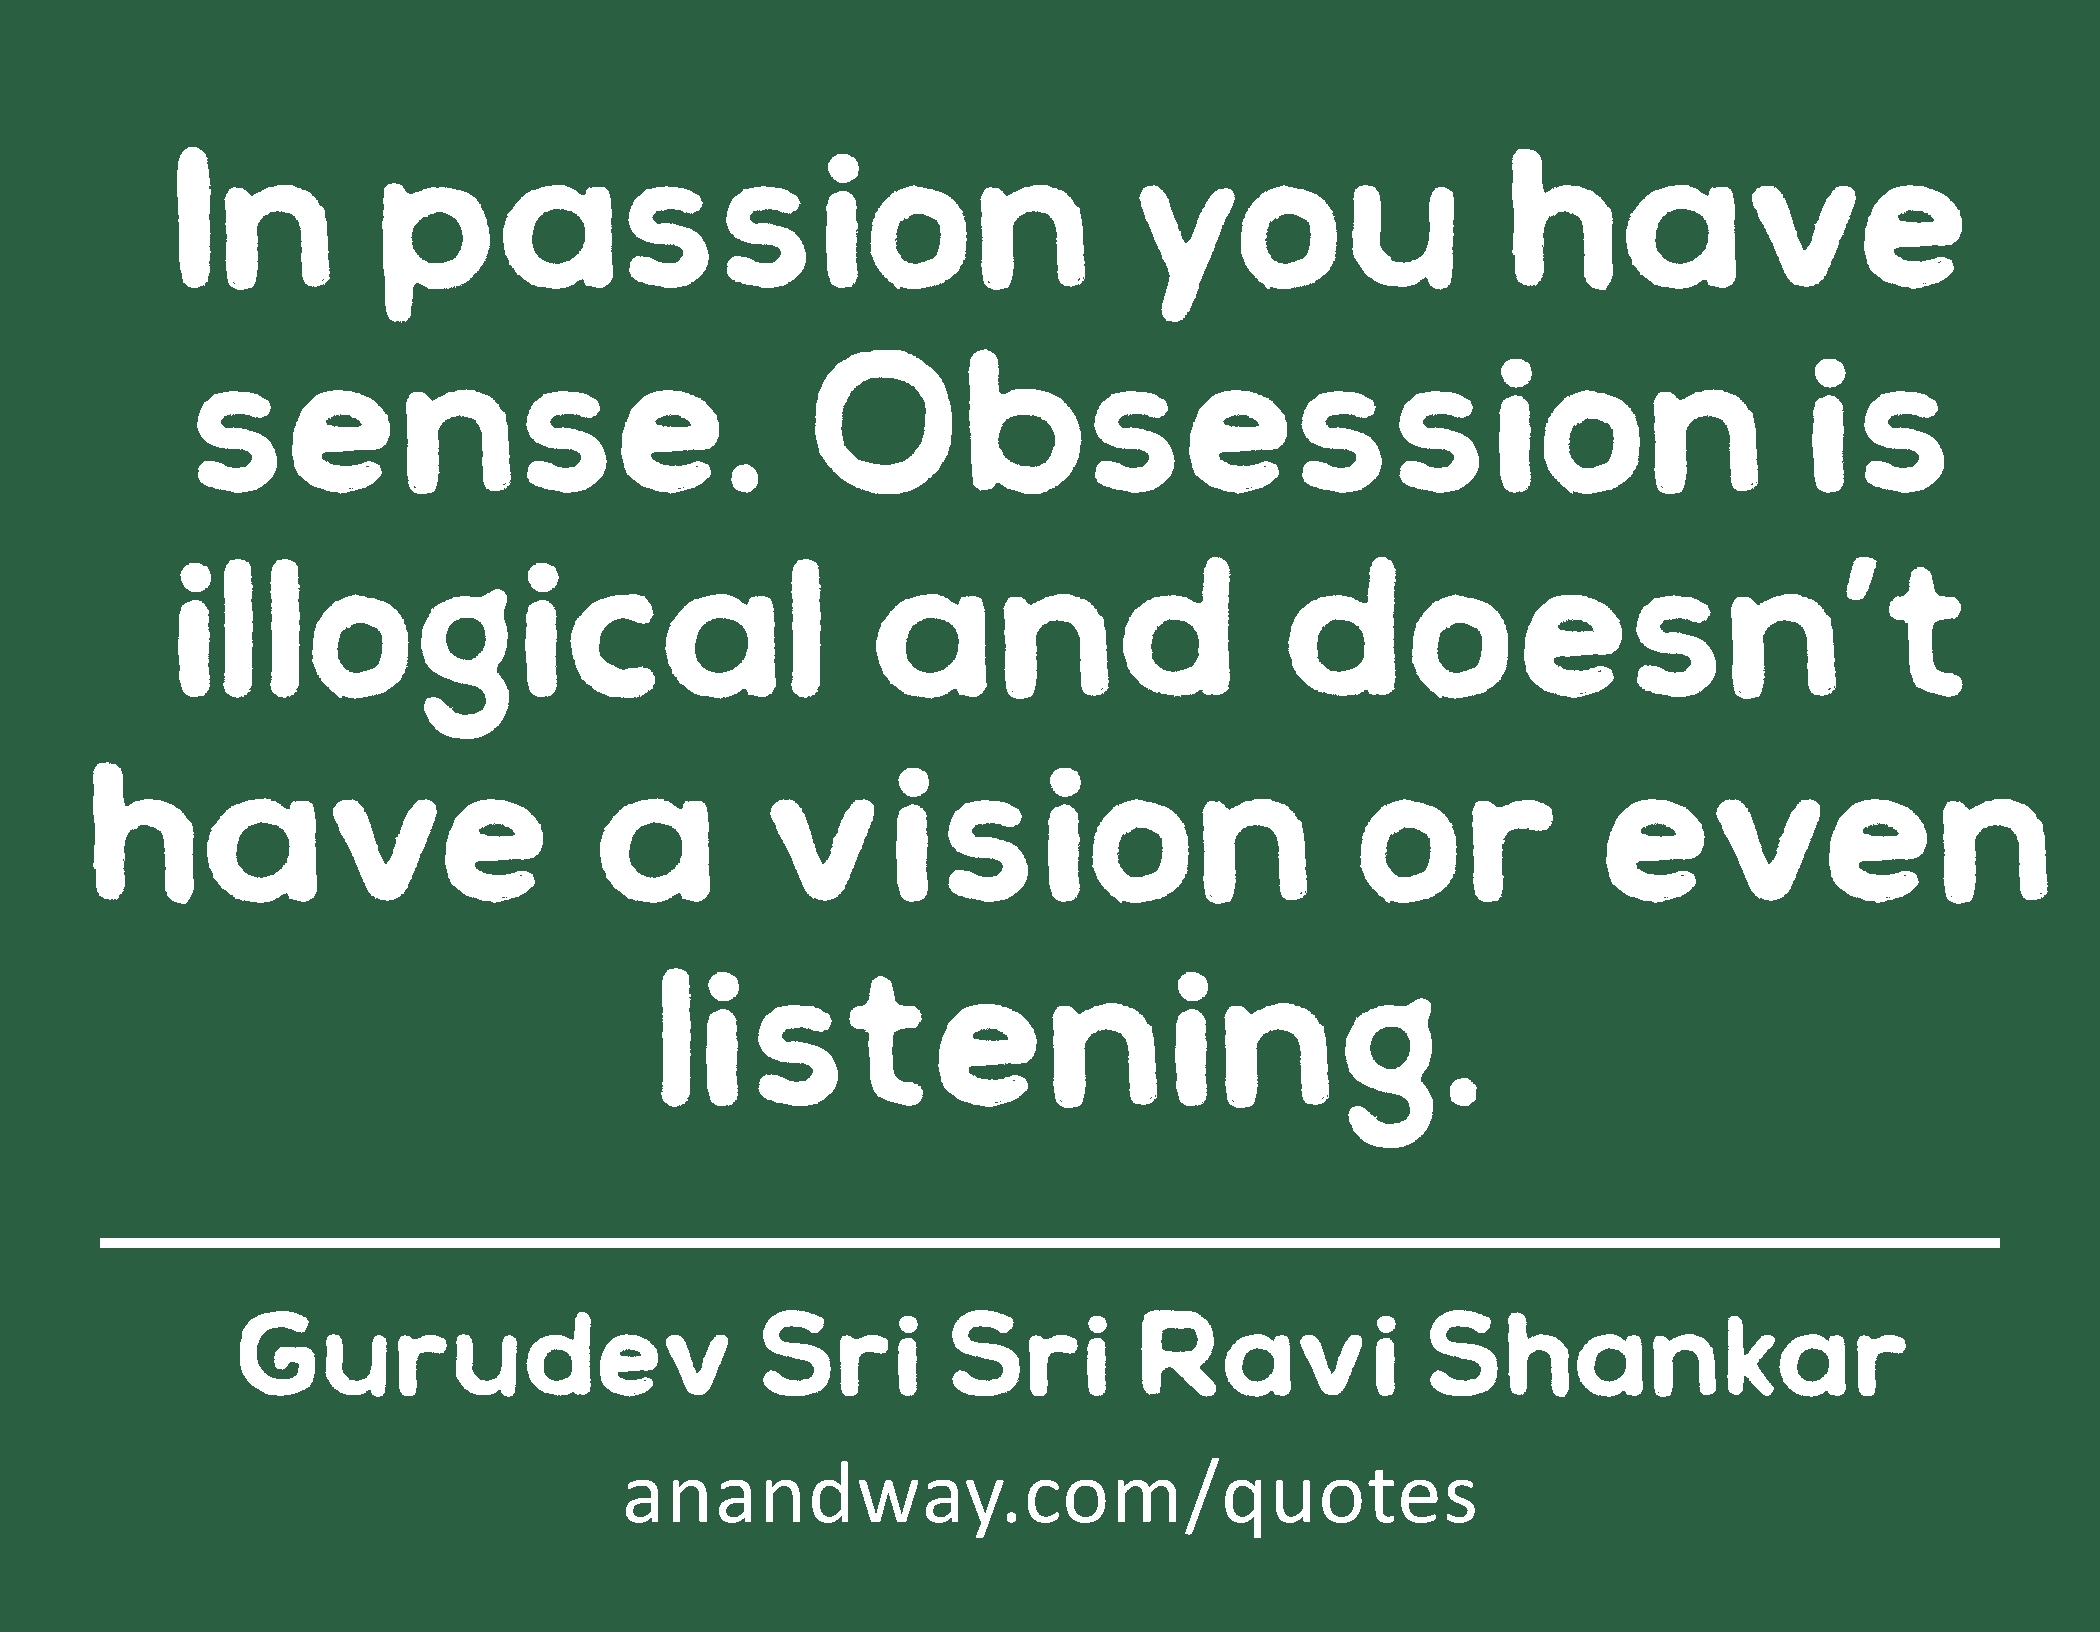 In passion you have sense. Obsession is illogical and doesn’t have a vision or even listening. 
 -Gurudev Sri Sri Ravi Shankar